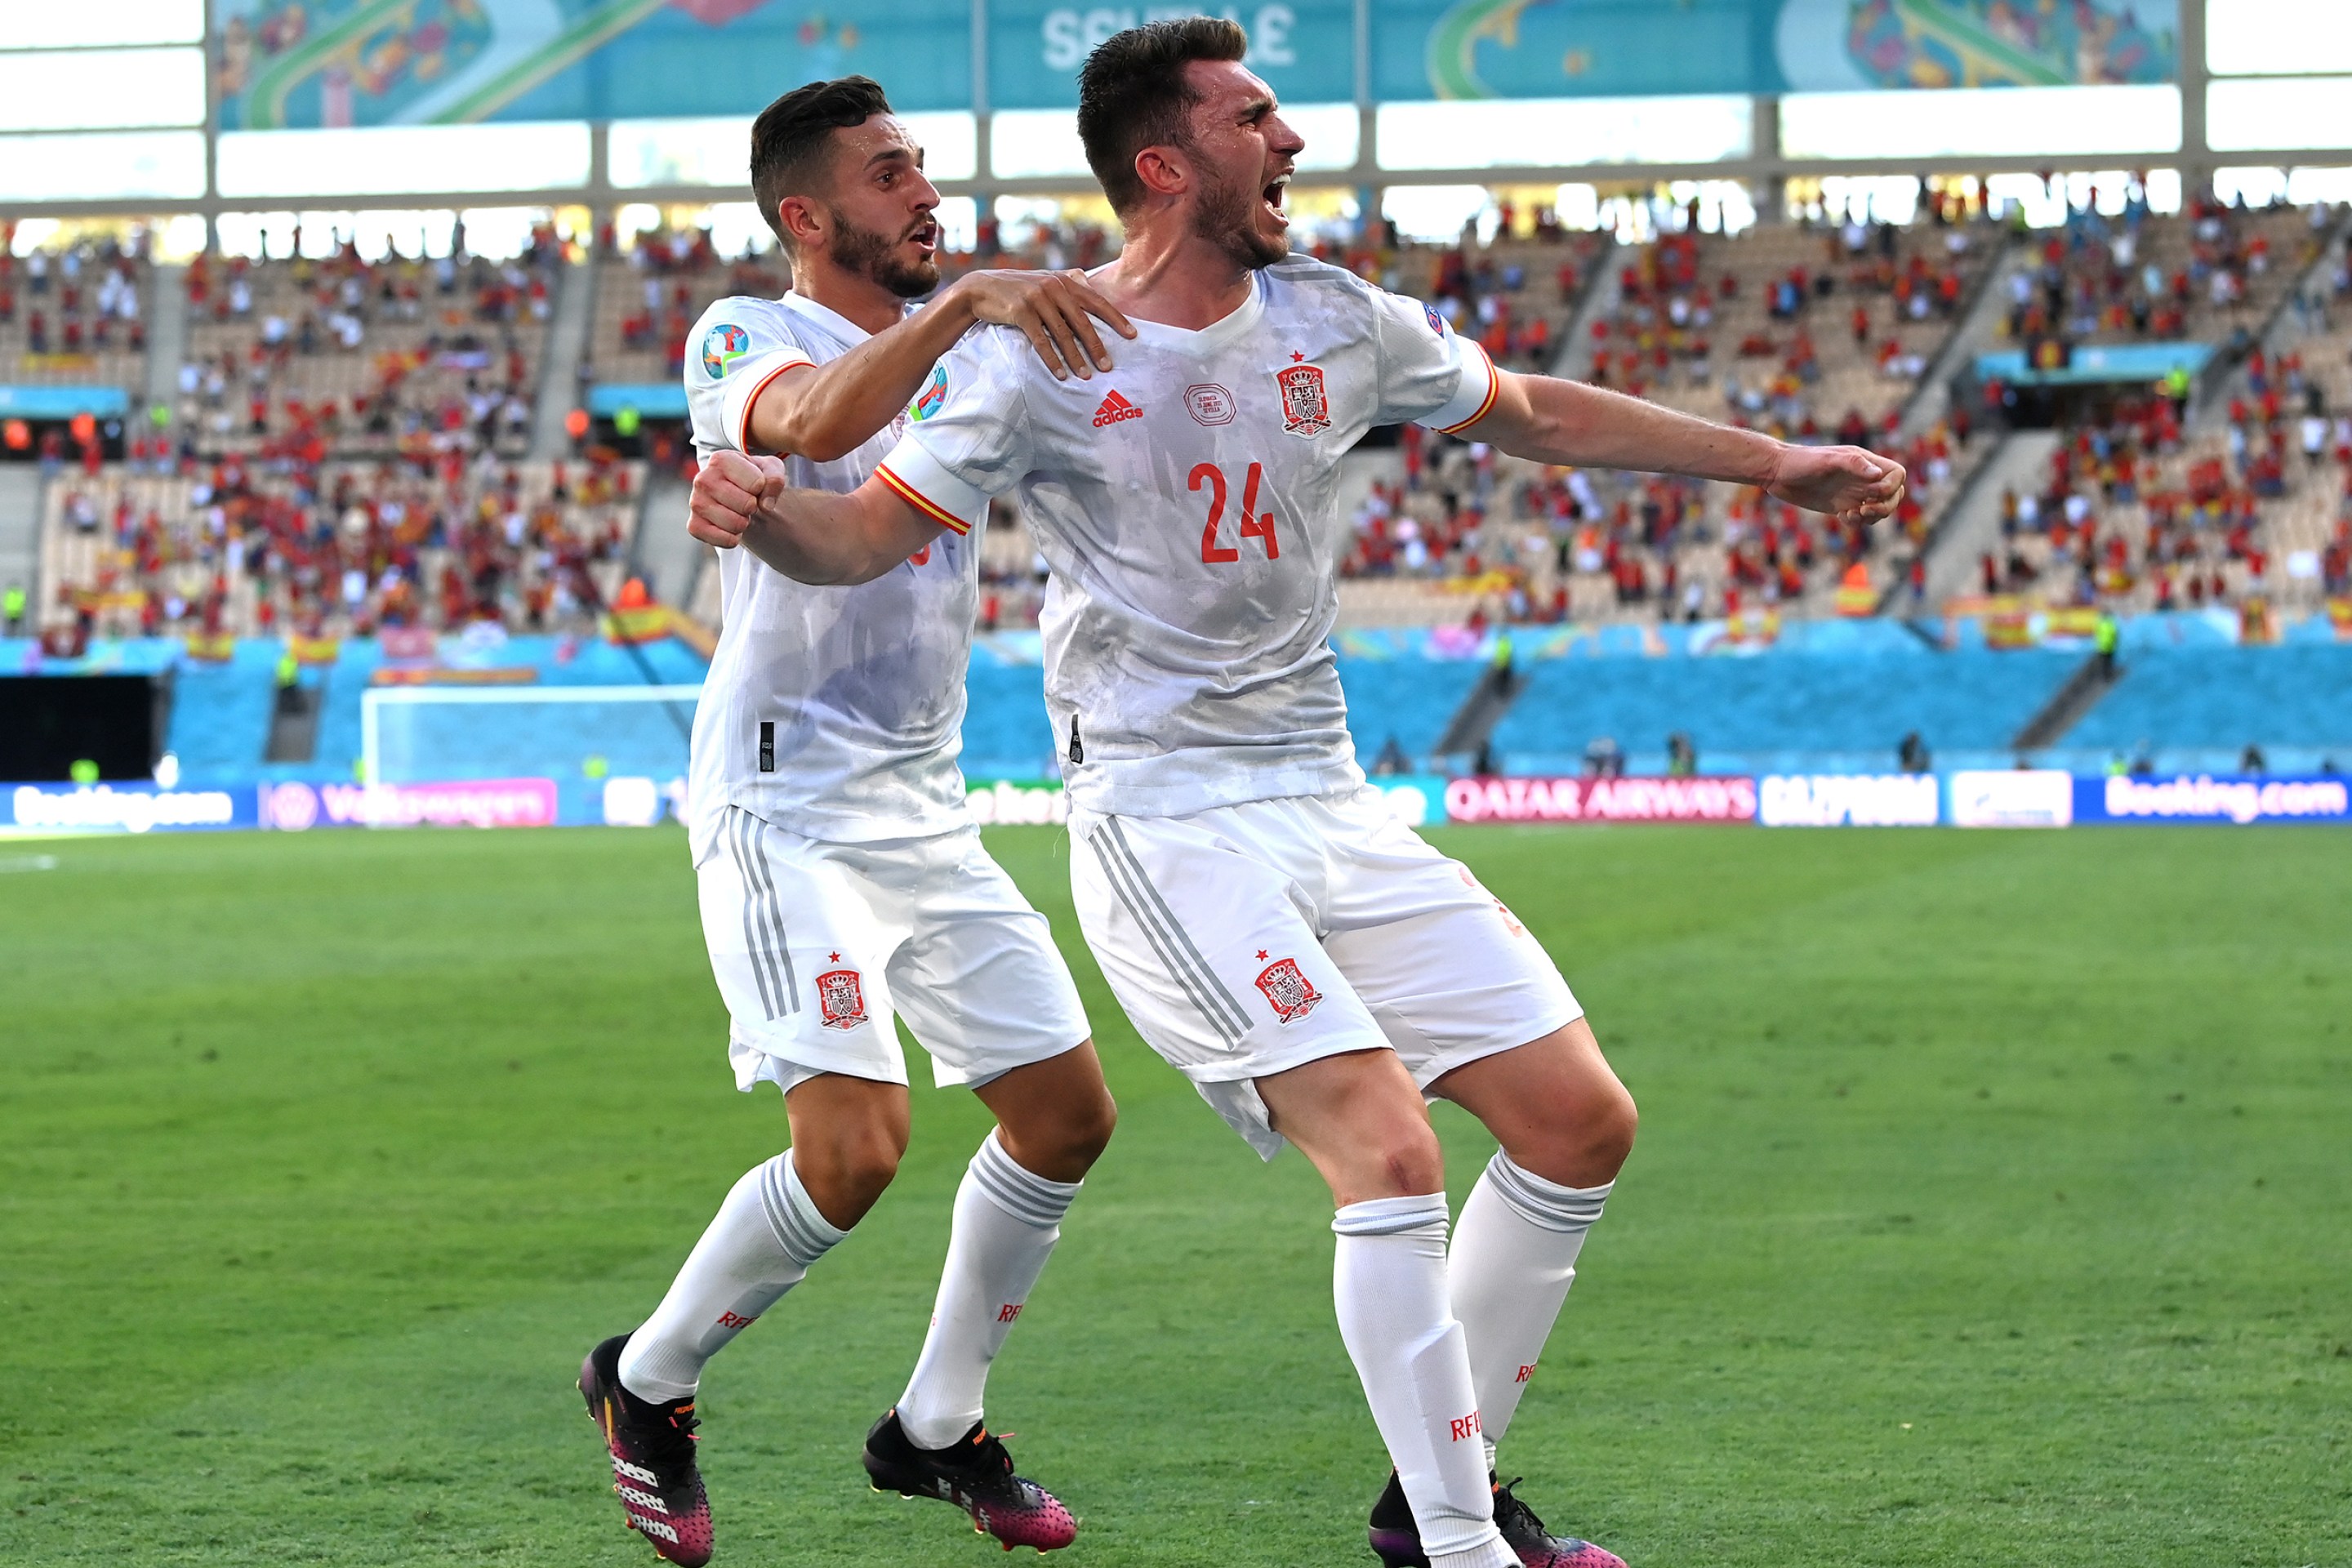 Aymeric Laporte of Spain celebrates with Koke after scoring their side's second goal during the UEFA Euro 2020 Championship Group E match between Slovakia and Spain at Estadio La Cartuja on June 23, 2021 in Seville, Spain.